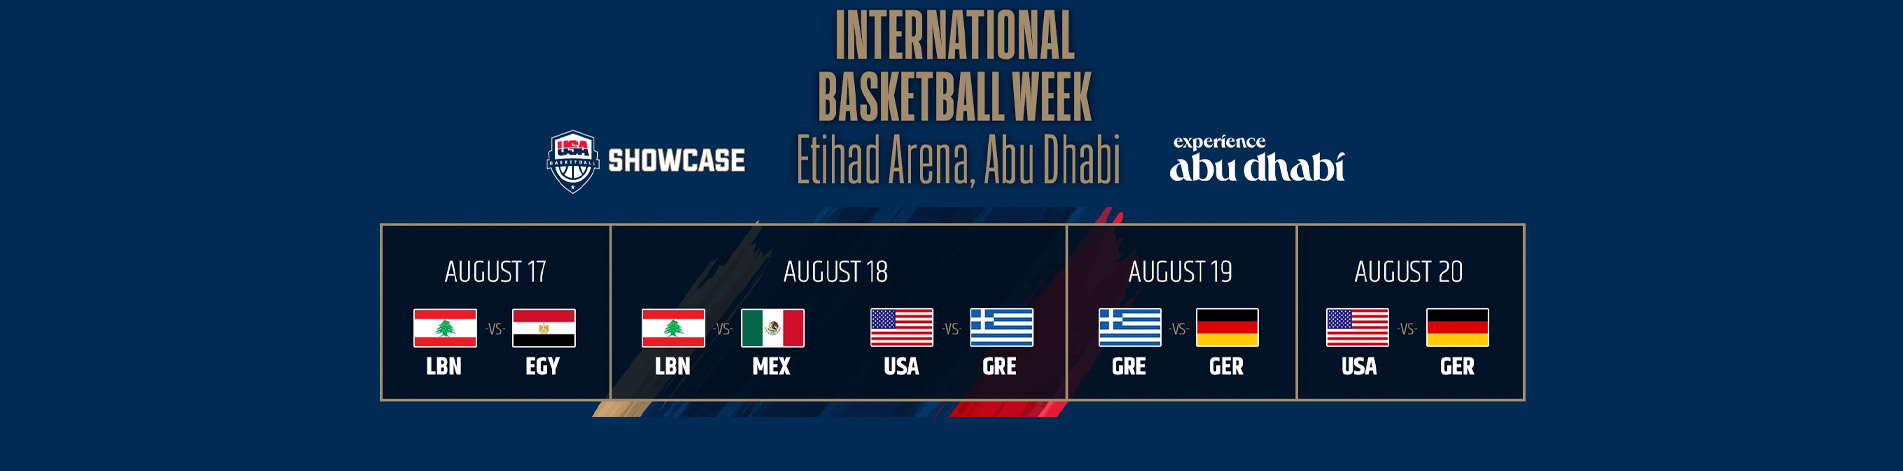 International Basketball Week Abu Dhabi Tickets and Hotel Packages 2023